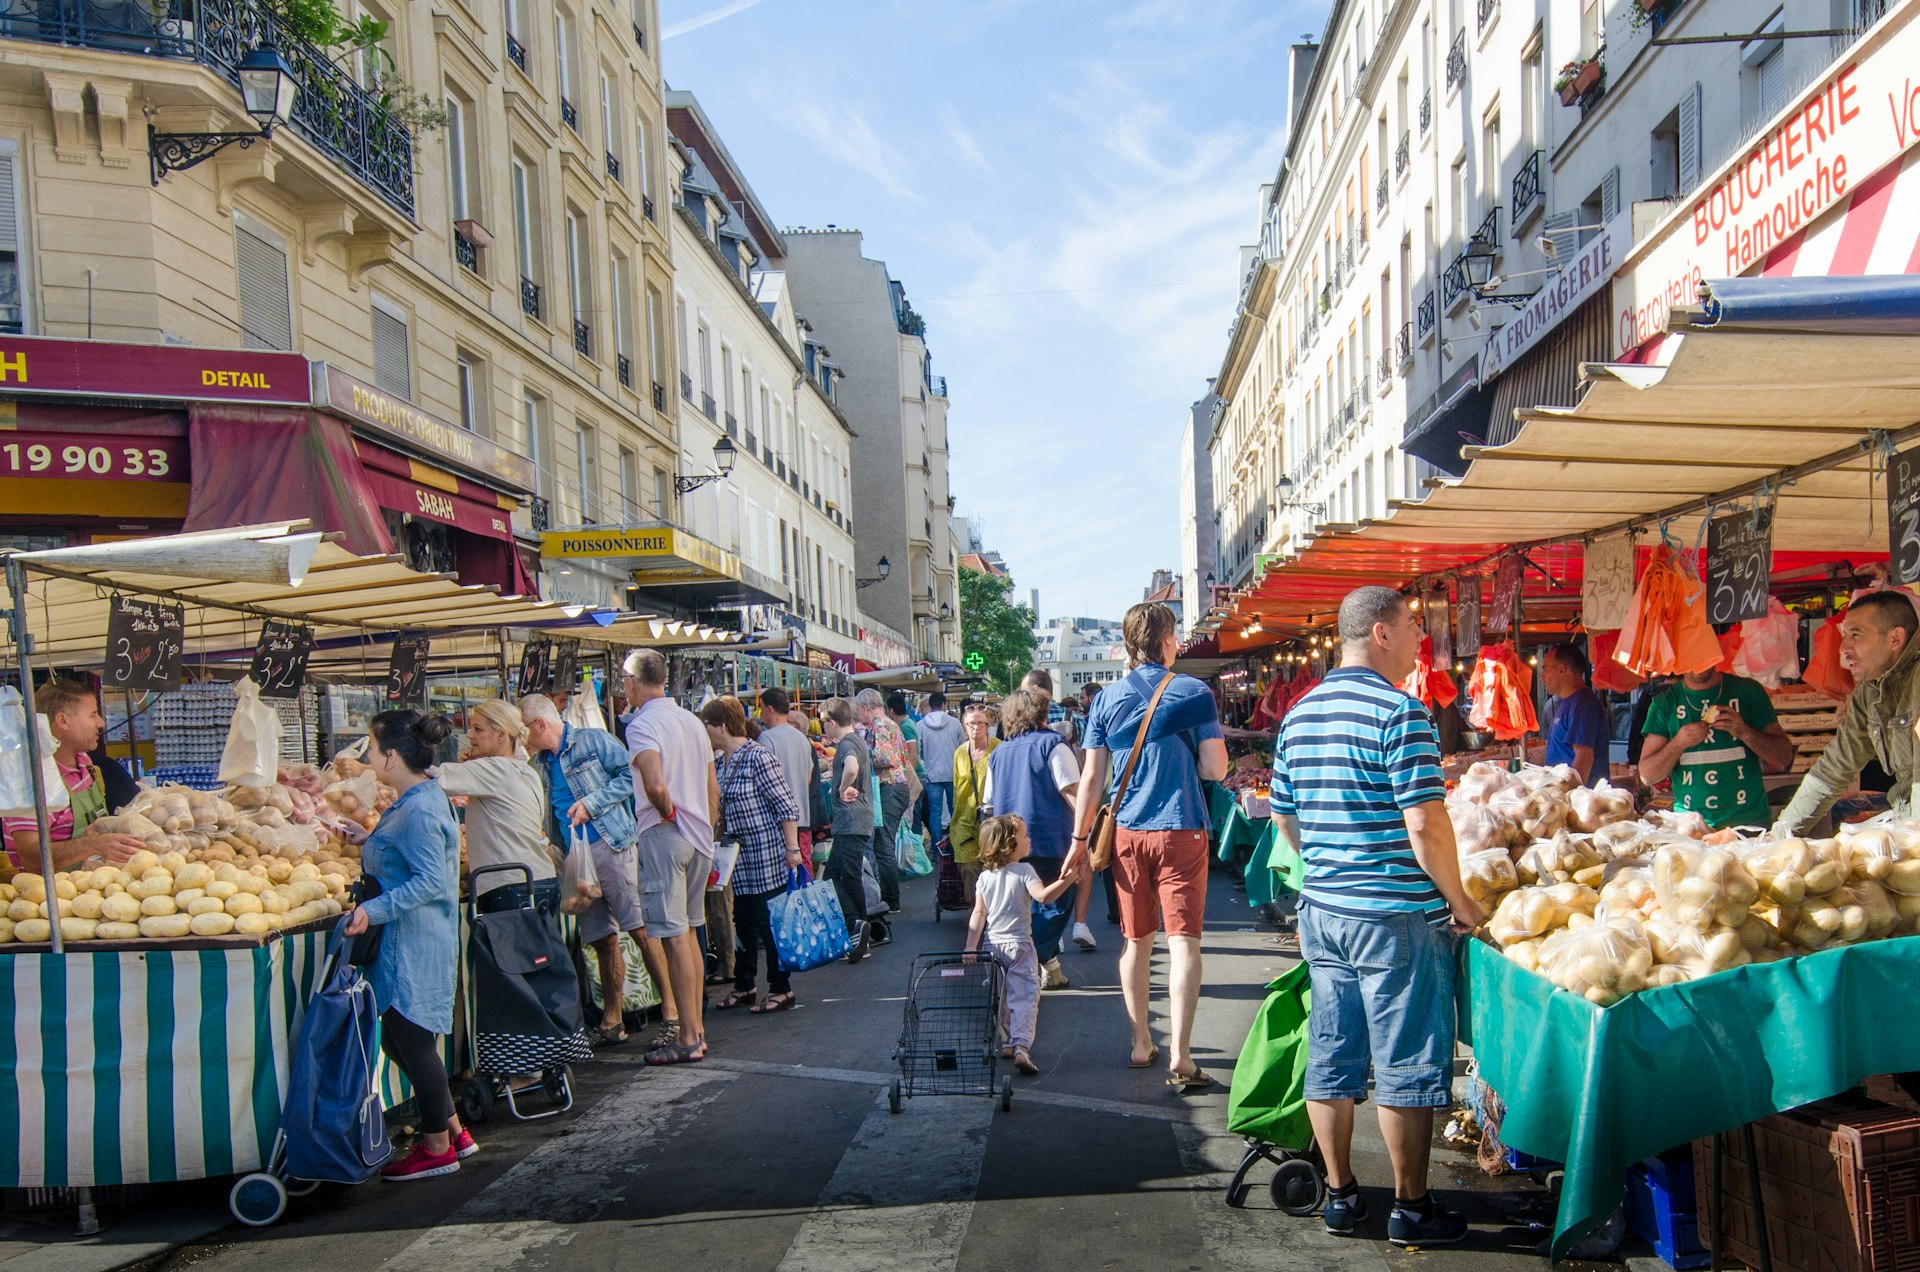 The open-air market in the Bastille district is one of the largest and busiest in the city